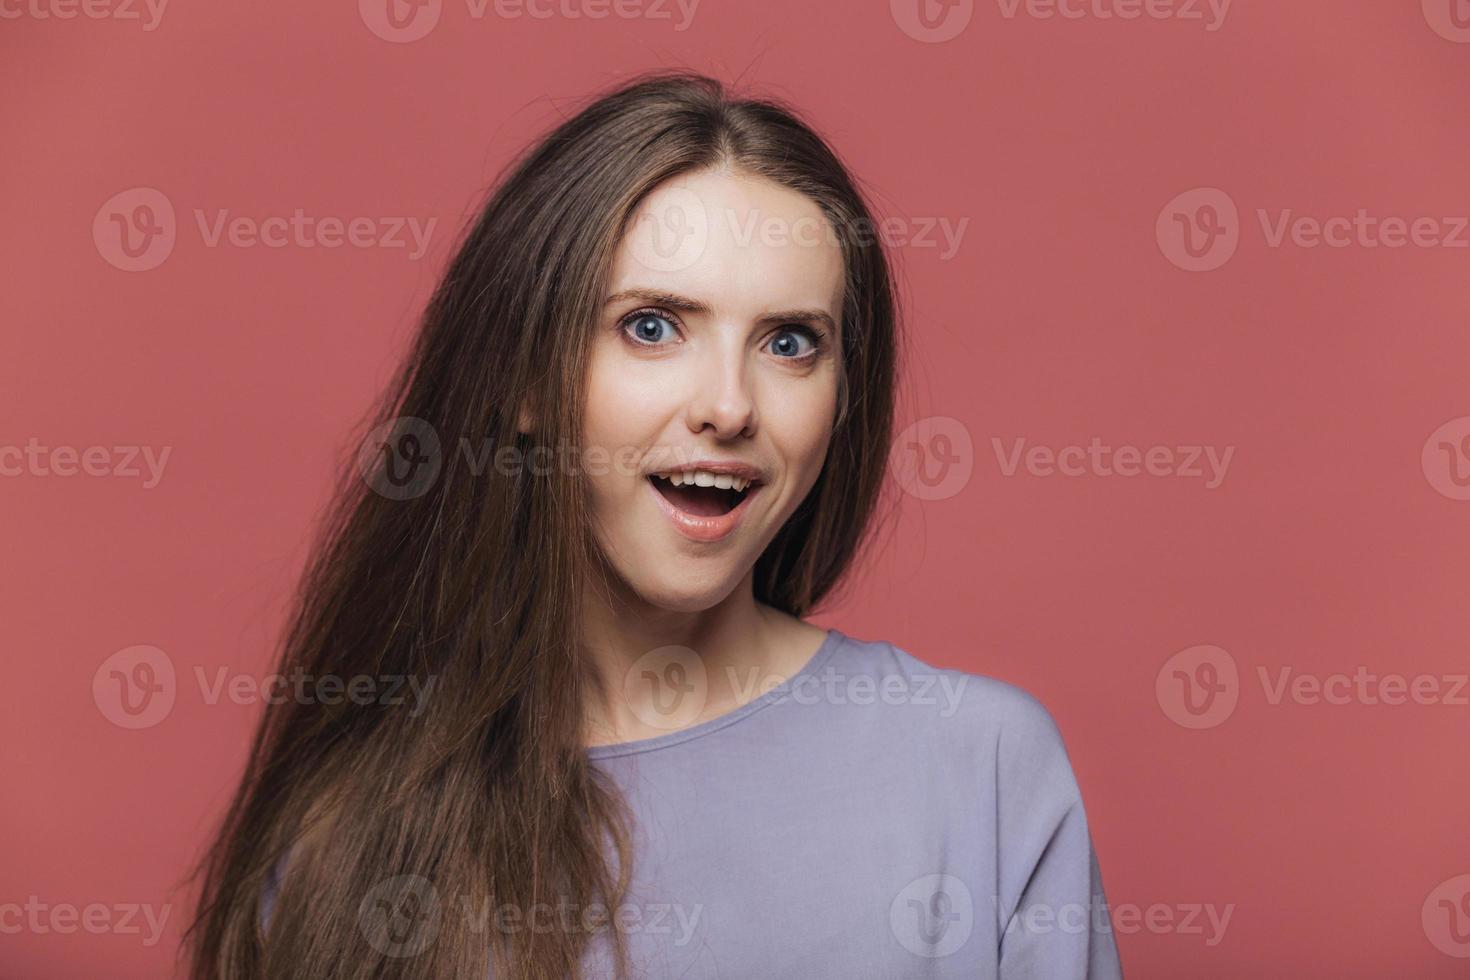 Amazed Satisfied Beautiful Female Model With Dark Straight Hair Keeps Mouth Opened Hears Unexpected News Poses Against Pink Studio Background People Emotions Facial Expressions Feelings Concept Stock Photo At Vecteezy